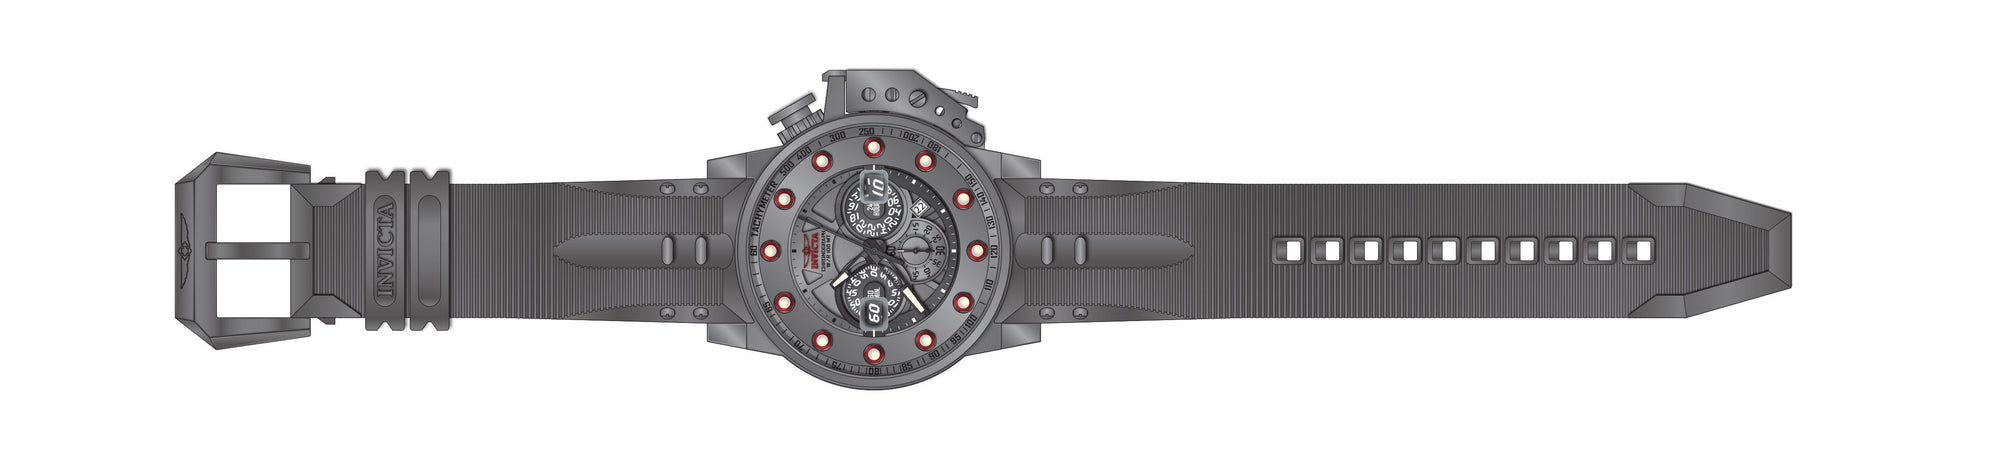 Band for Invicta I-Force 25278